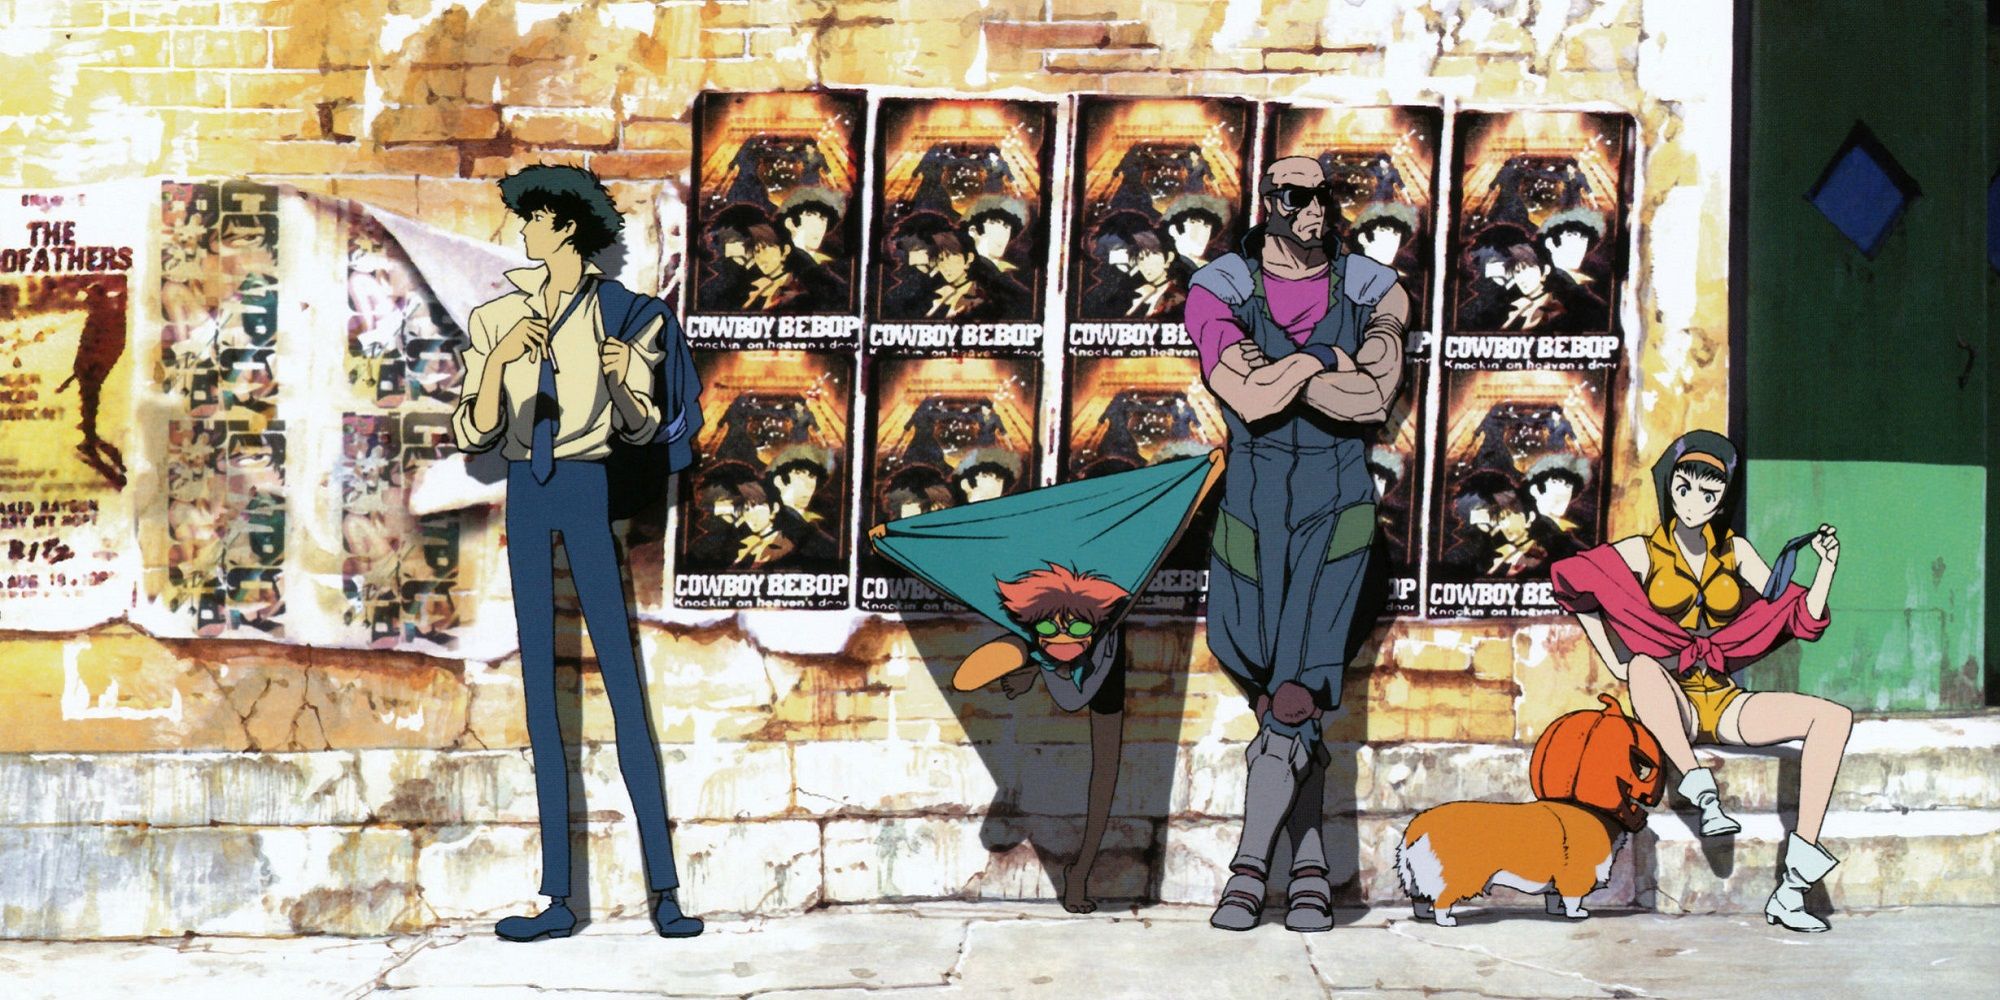 All the characters of Cowboy Bebop leaning against a wall in the Anime Series